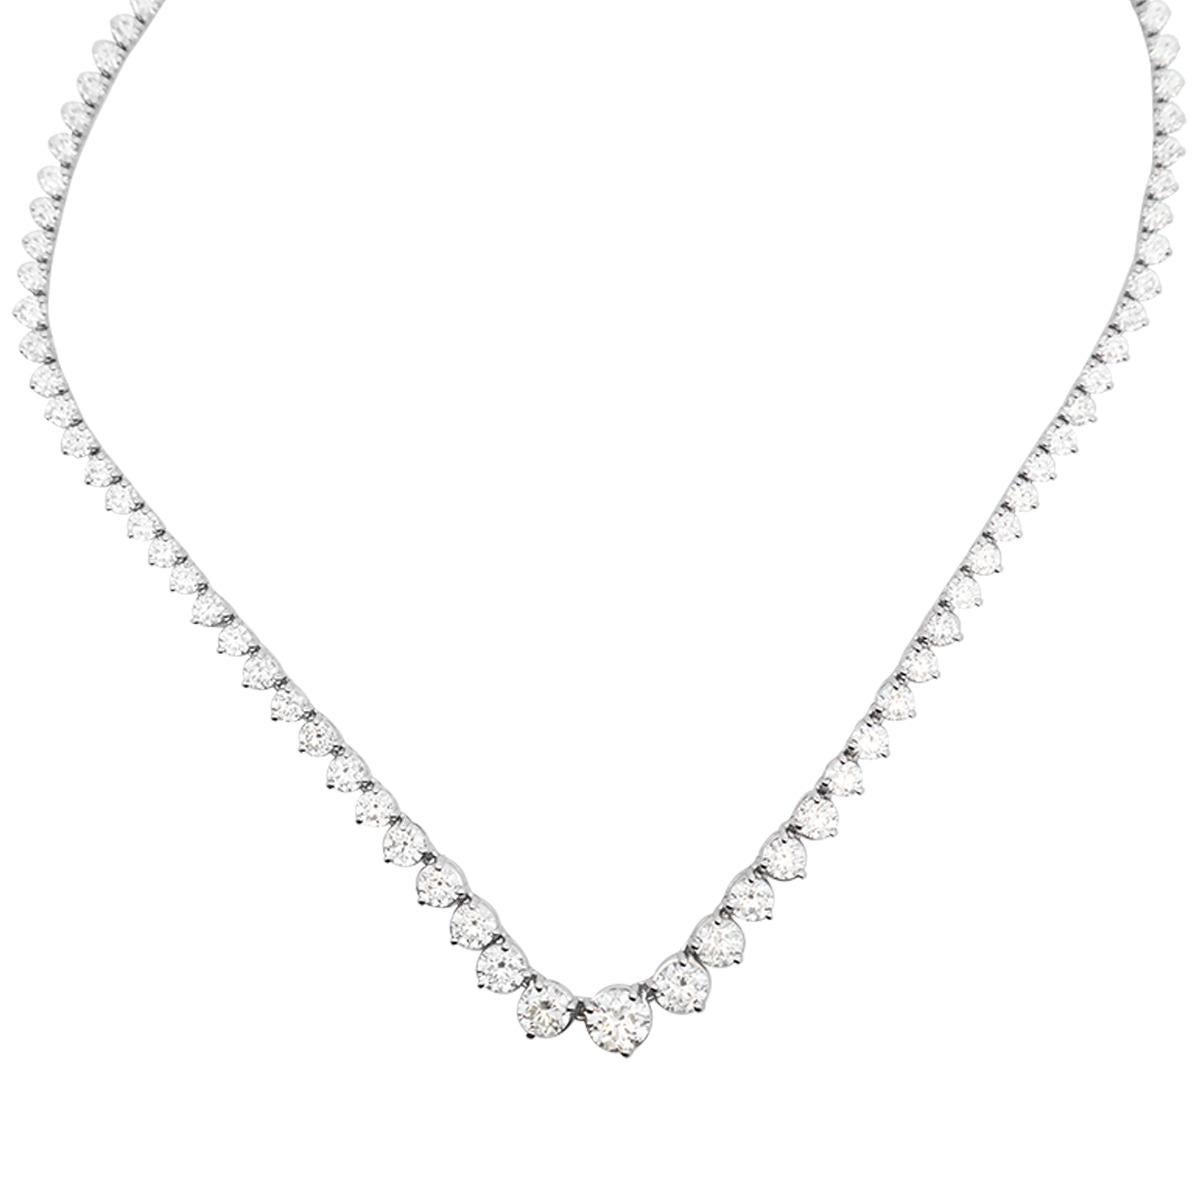 It's time to treat yourself to the one you've always wanted. Whether with a white tee or a gala dress this piece will impress. Our graduated tennis necklace made with 96 diamonds in a total of 20.38ct t.w round cut diamonds. Set in 18K White Gold.